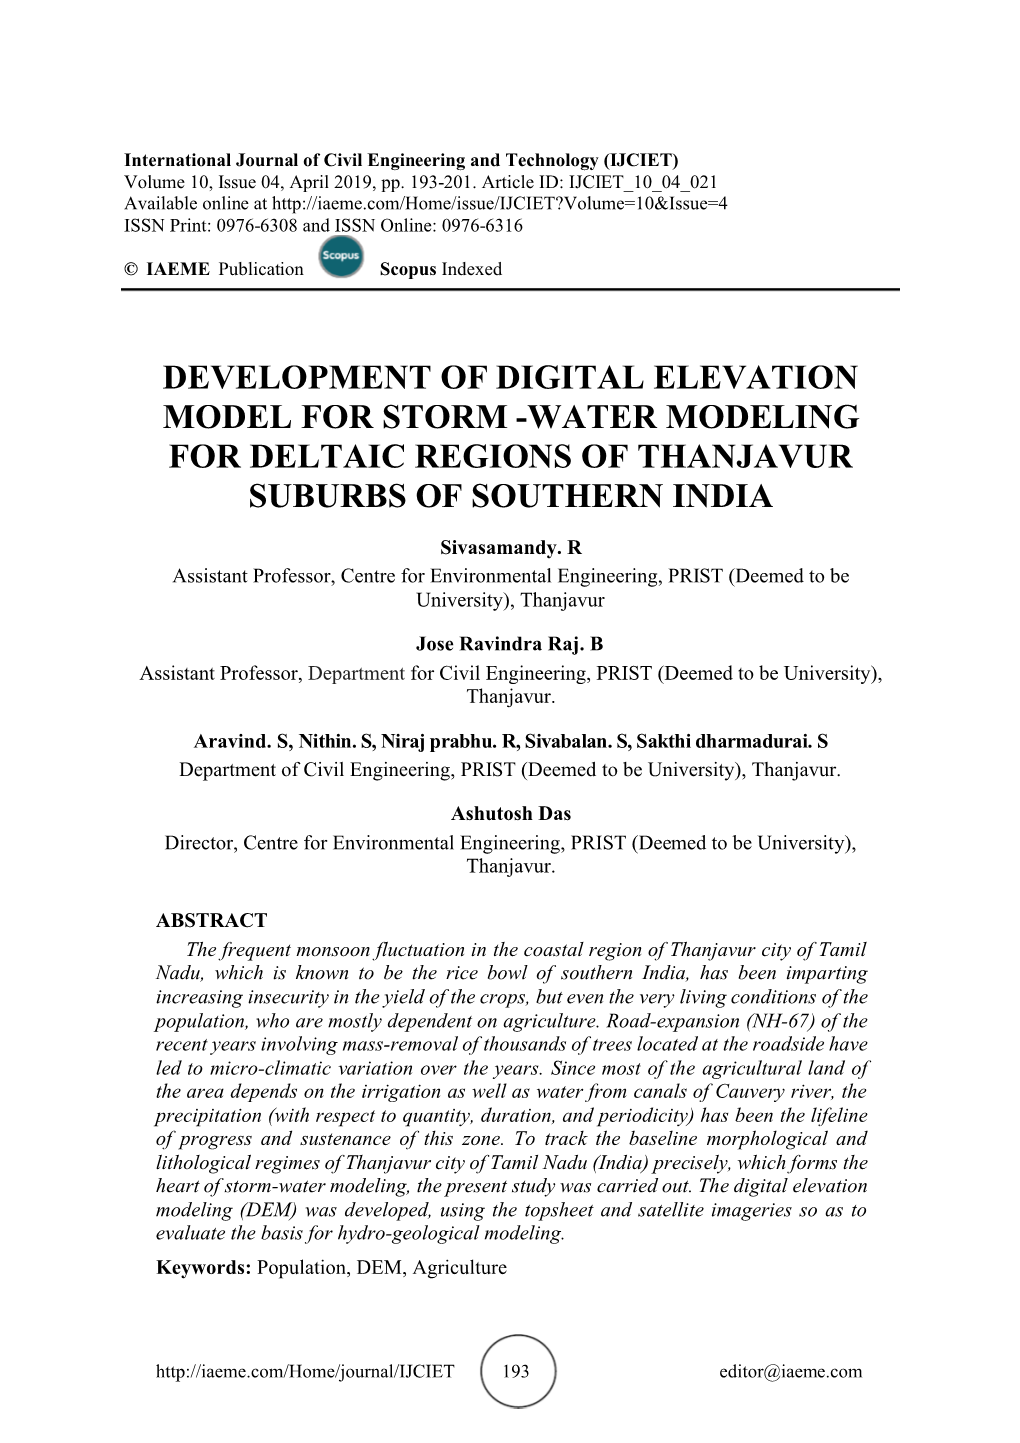 Development of Digital Elevation Model for Storm -Water Modeling for Deltaic Regions of Thanjavur Suburbs of Southern India